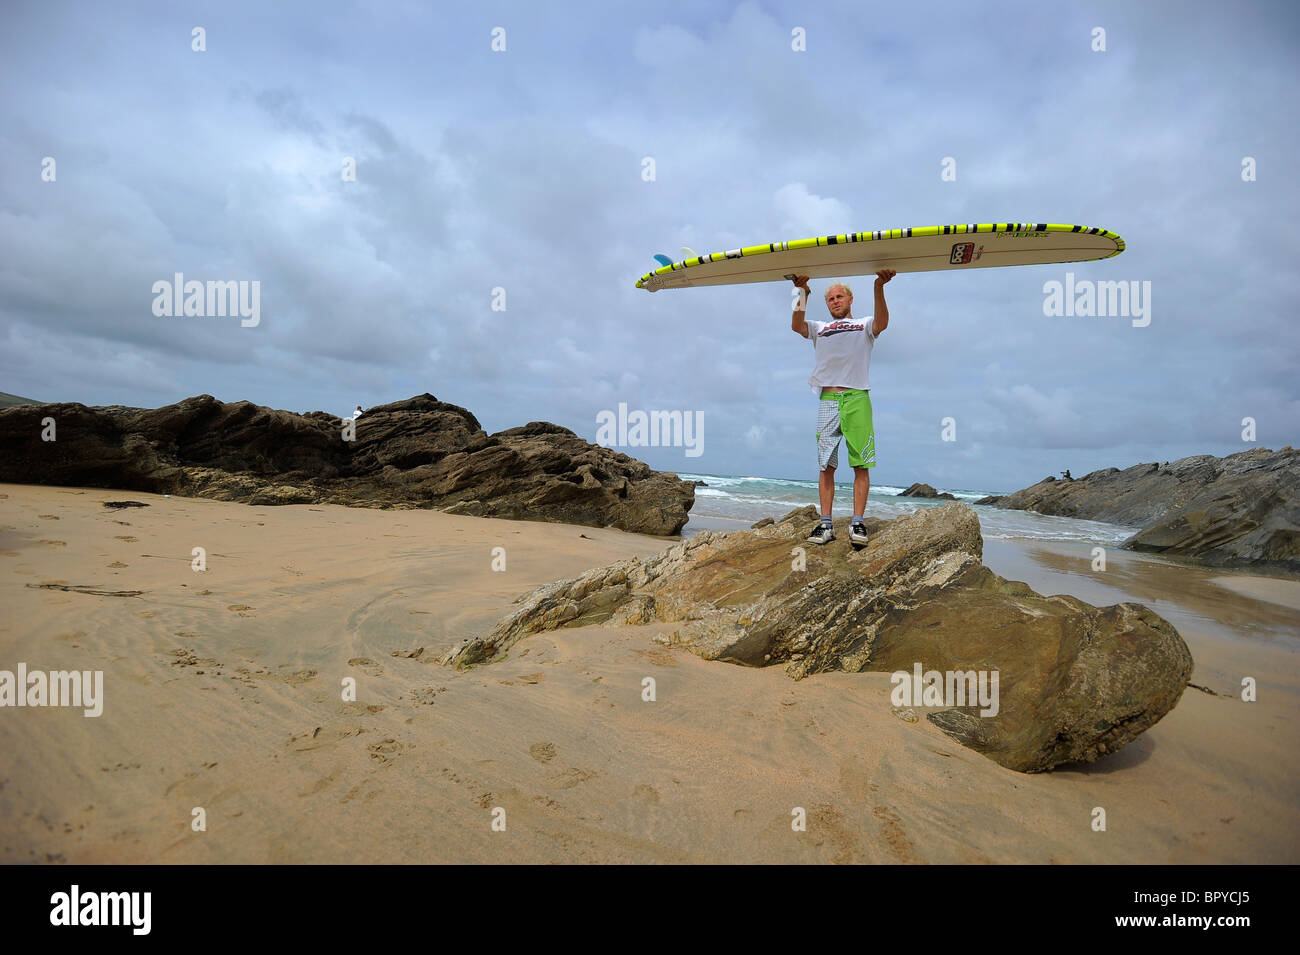 A surfer, Ben Howey, holding a longboard surfboard on the beach at Fistral, Newquay, the UK's surfing capital, in Cornwall Stock Photo